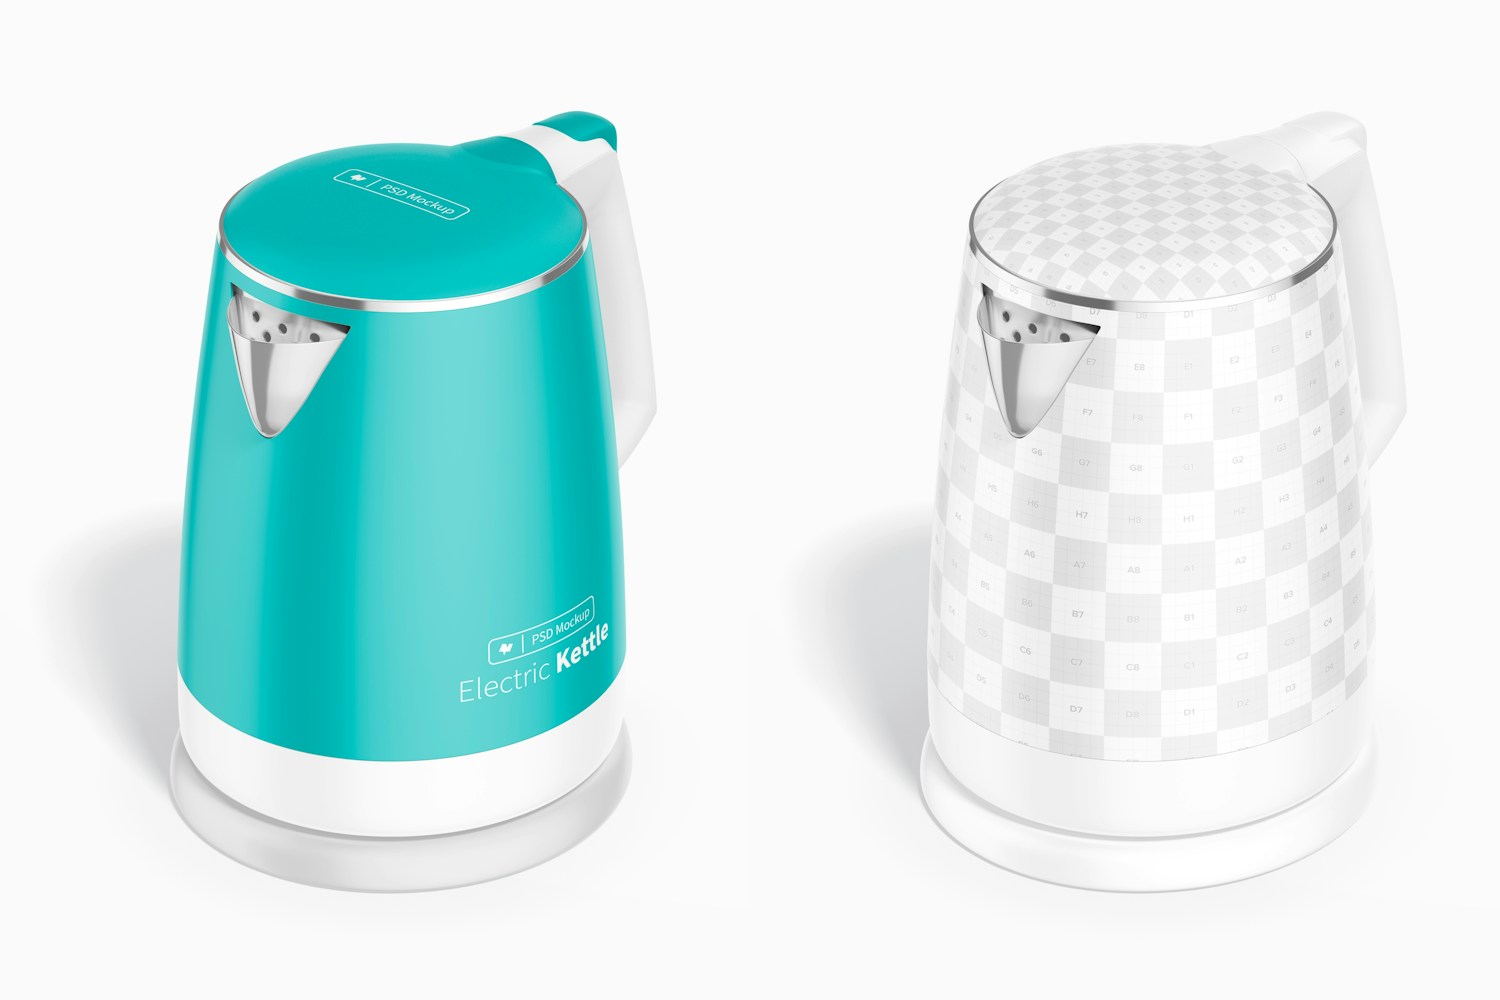 Electric Kettle Mockup, Perspective